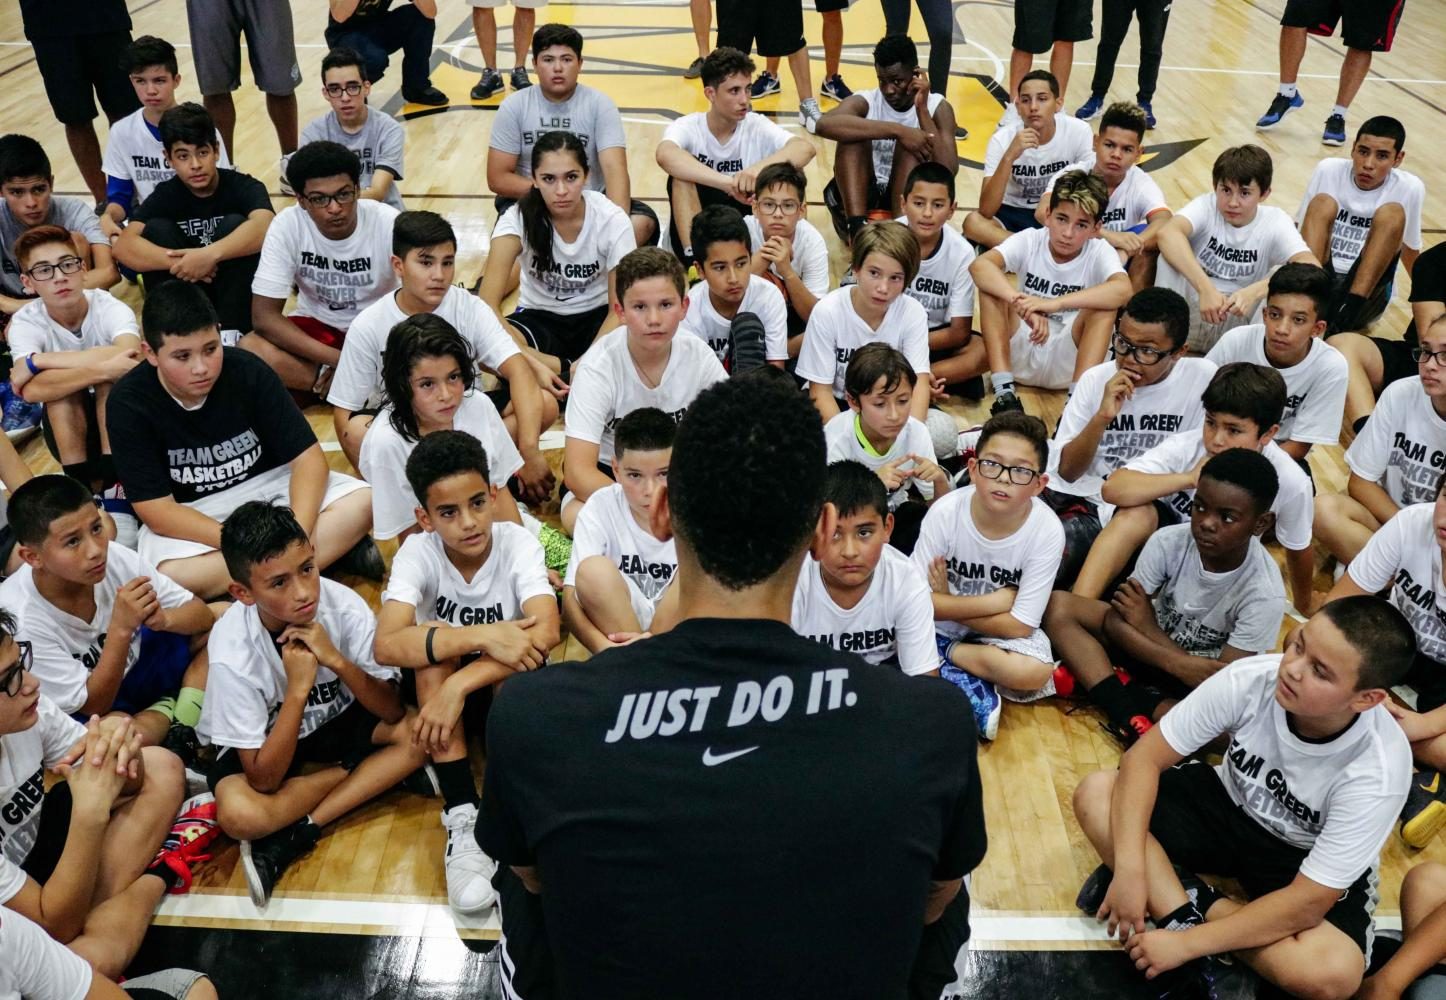 San Antonio Spurs player Danny Green held a Q&A with young basketball players during his Basketball Skills Camp.